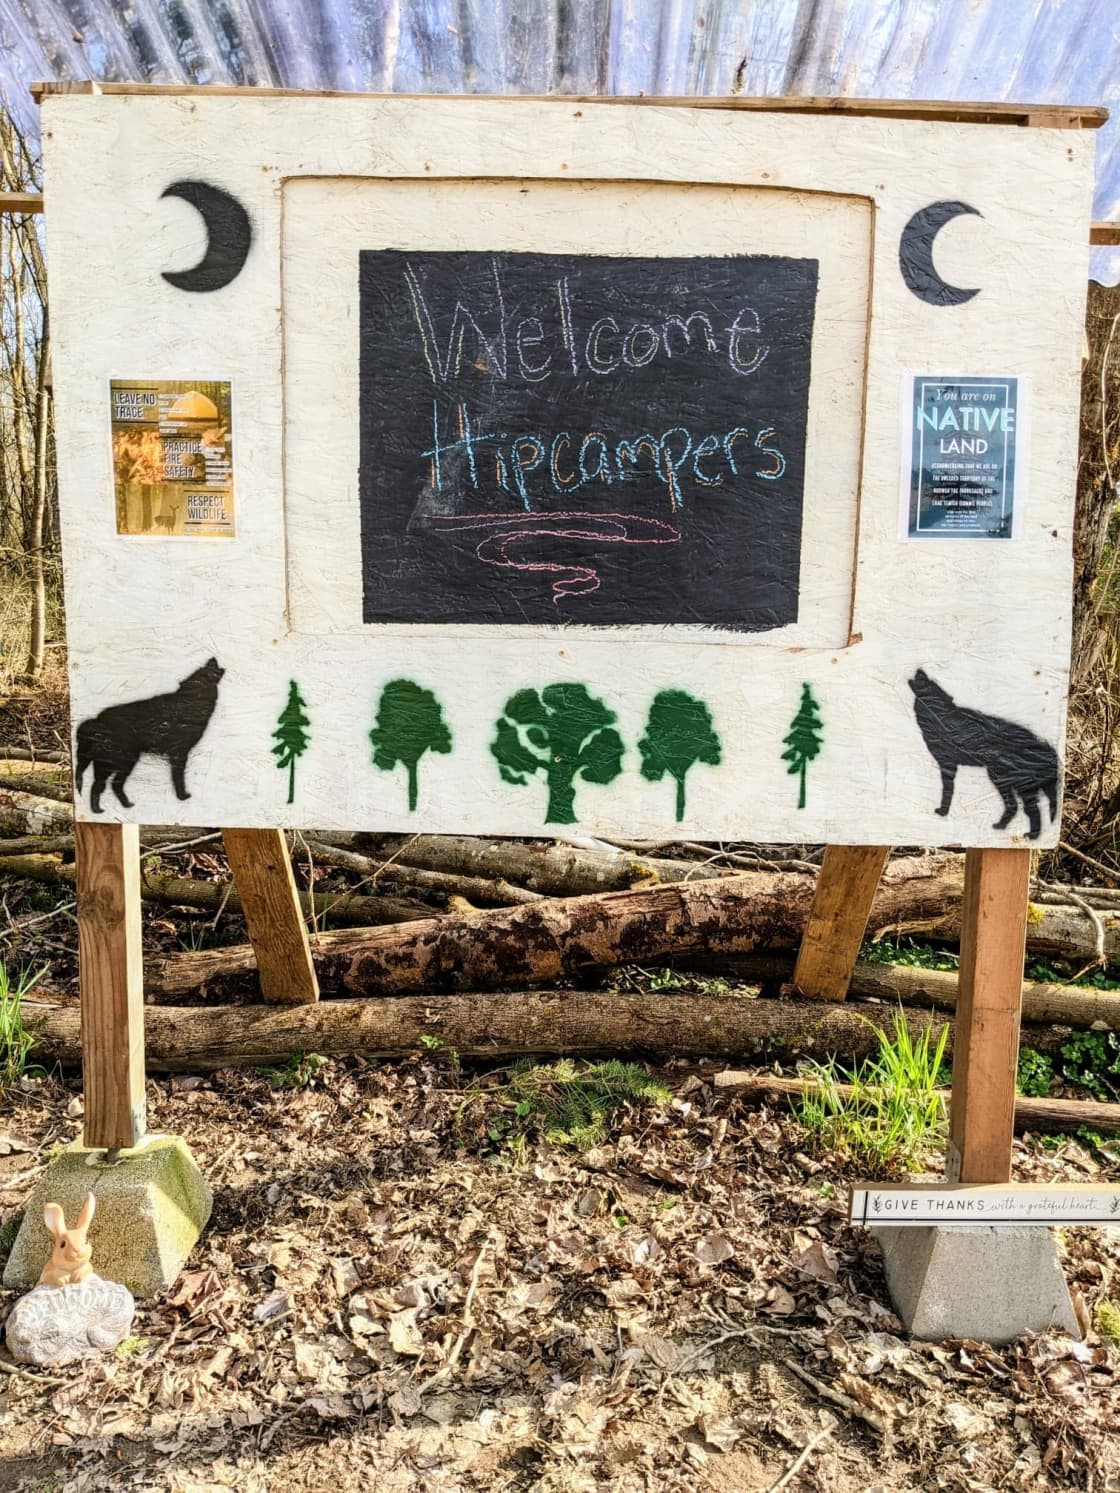 This is our welcome board for any important messages, but most importantly, to welcome you!